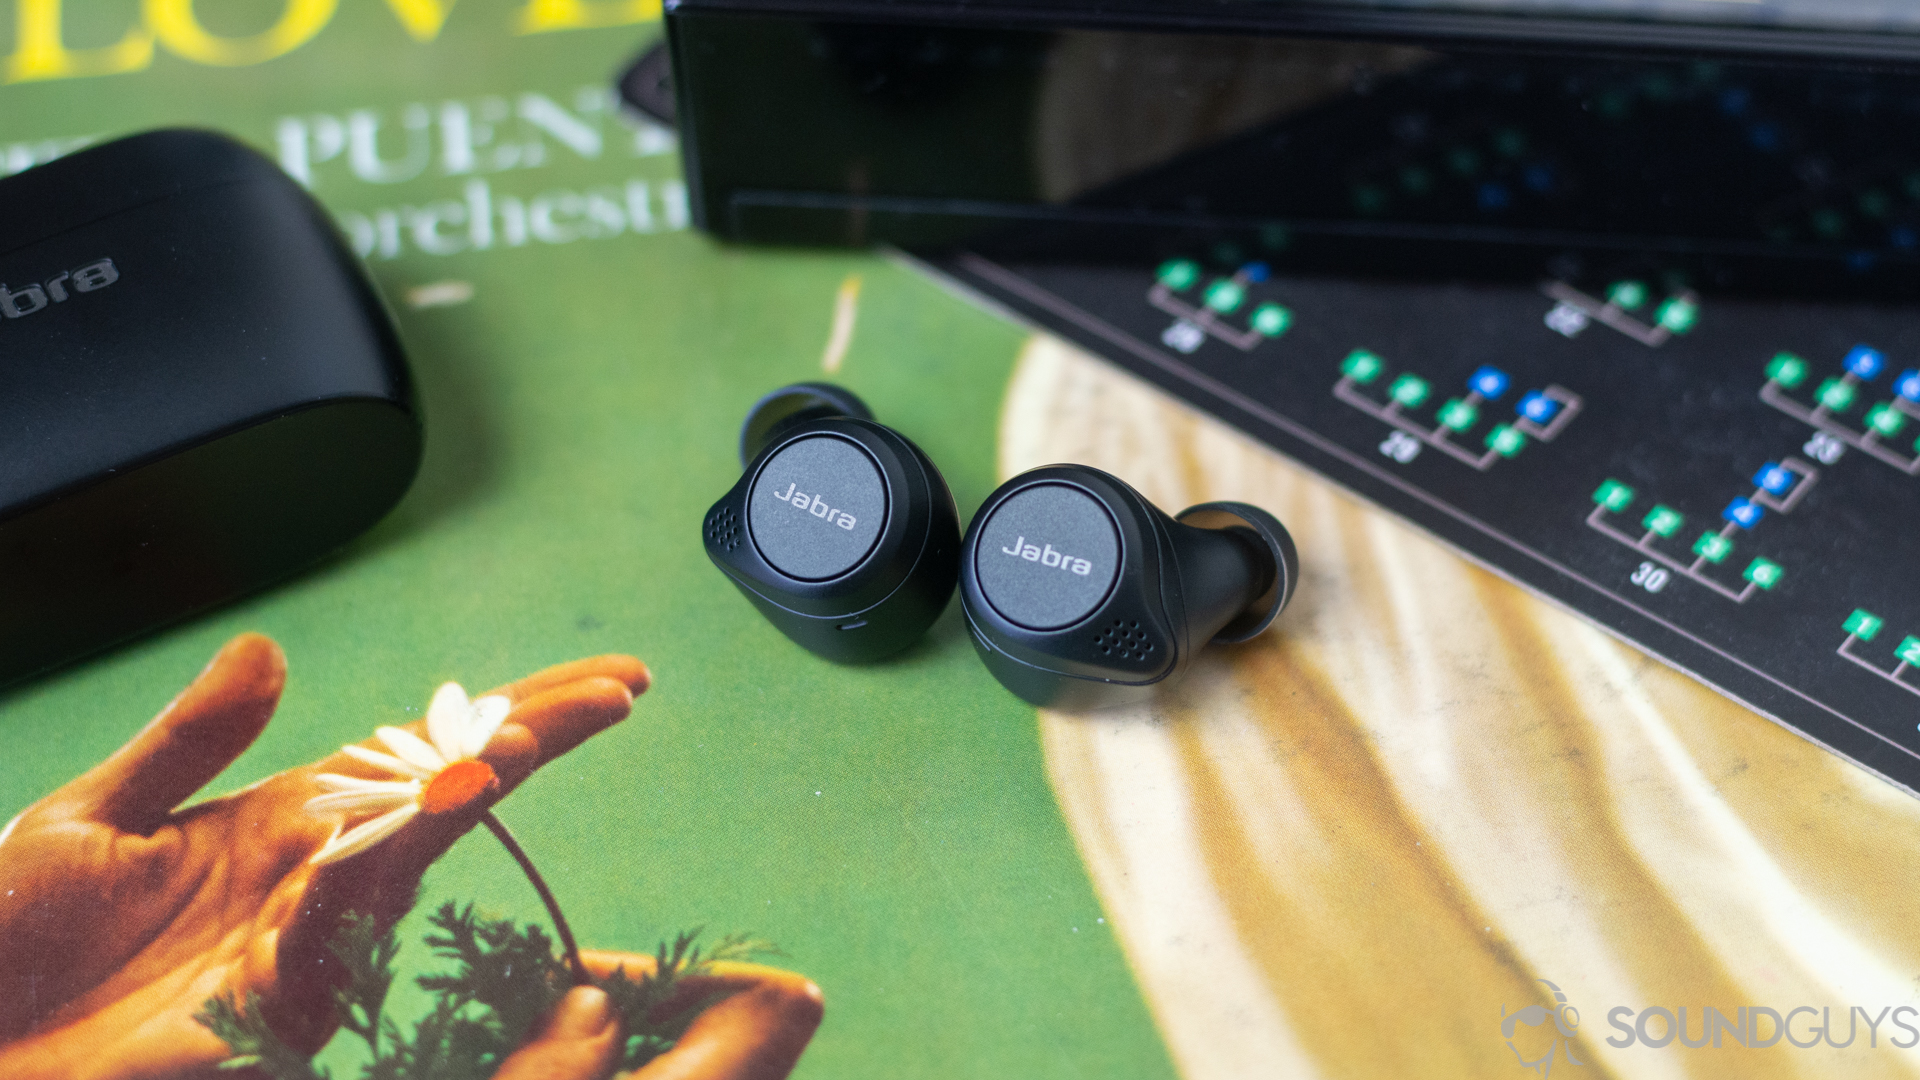 Close-up of the Jabra Elite 75t earbuds playback buttons on an old record